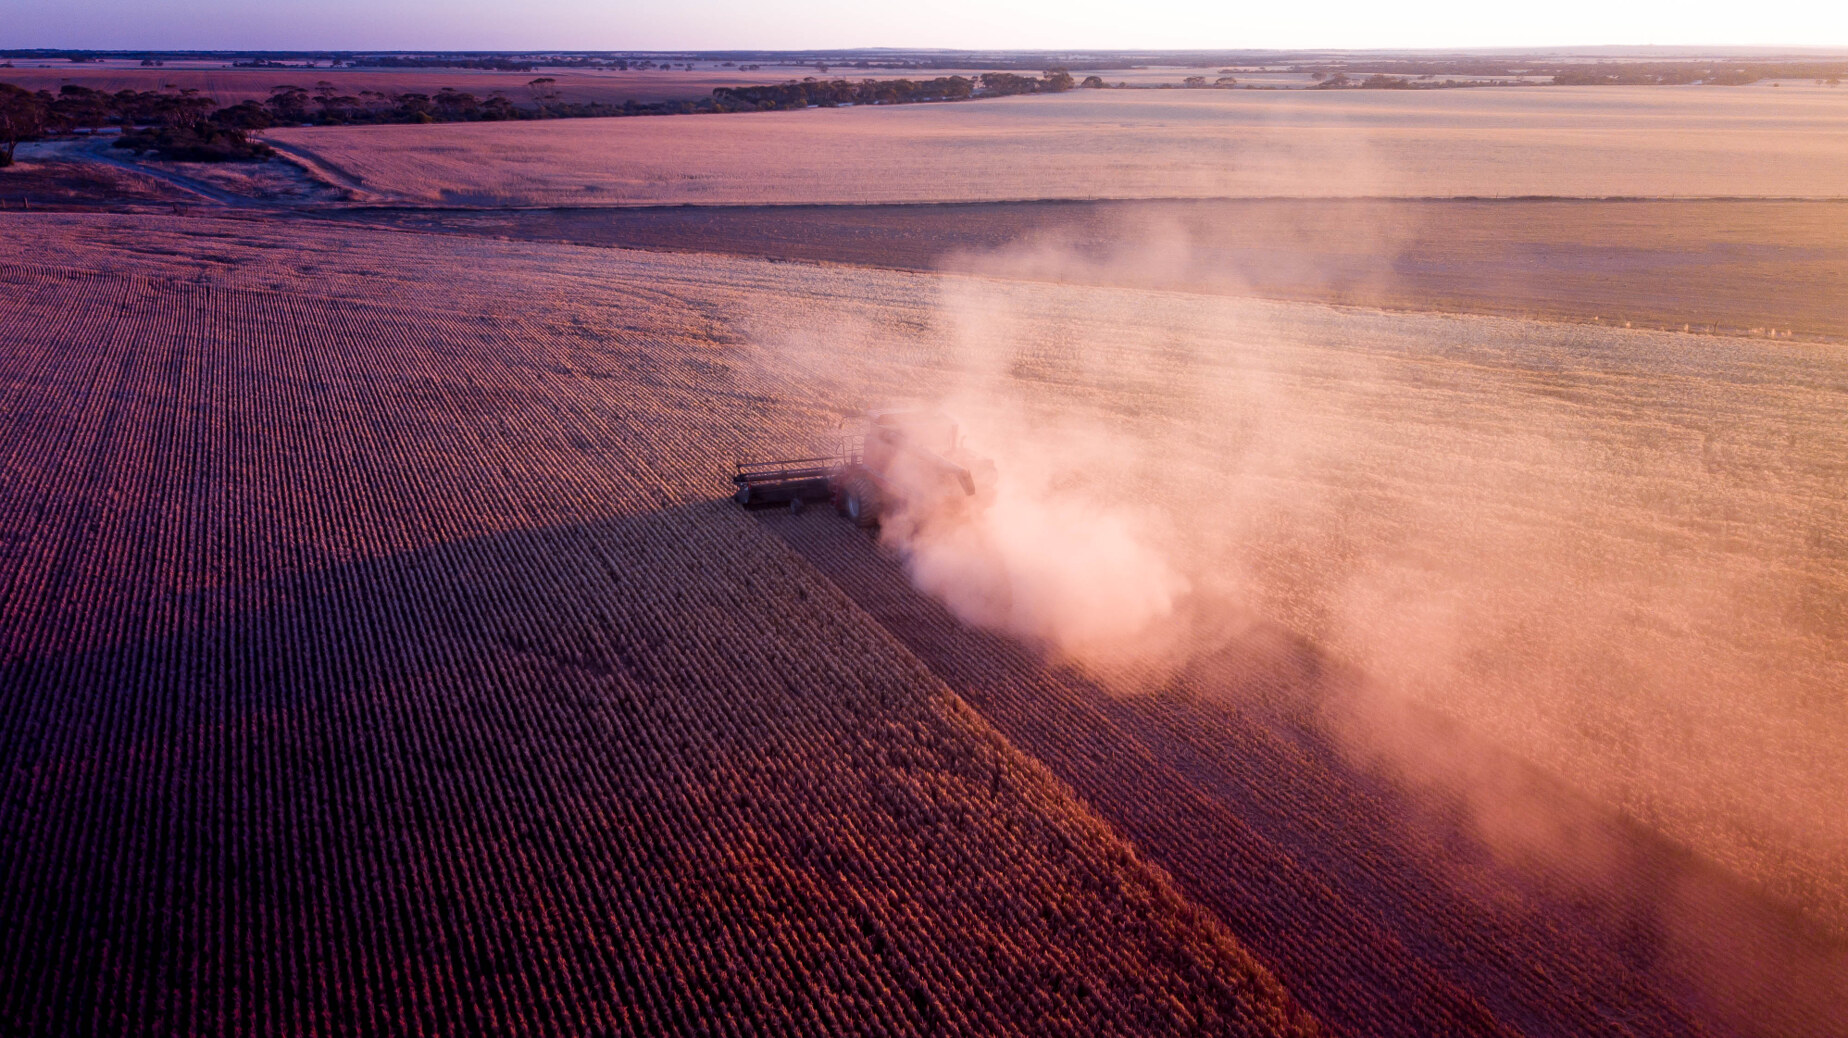 A harvester in the wheat fields of Streaky Bay district in the early morning light